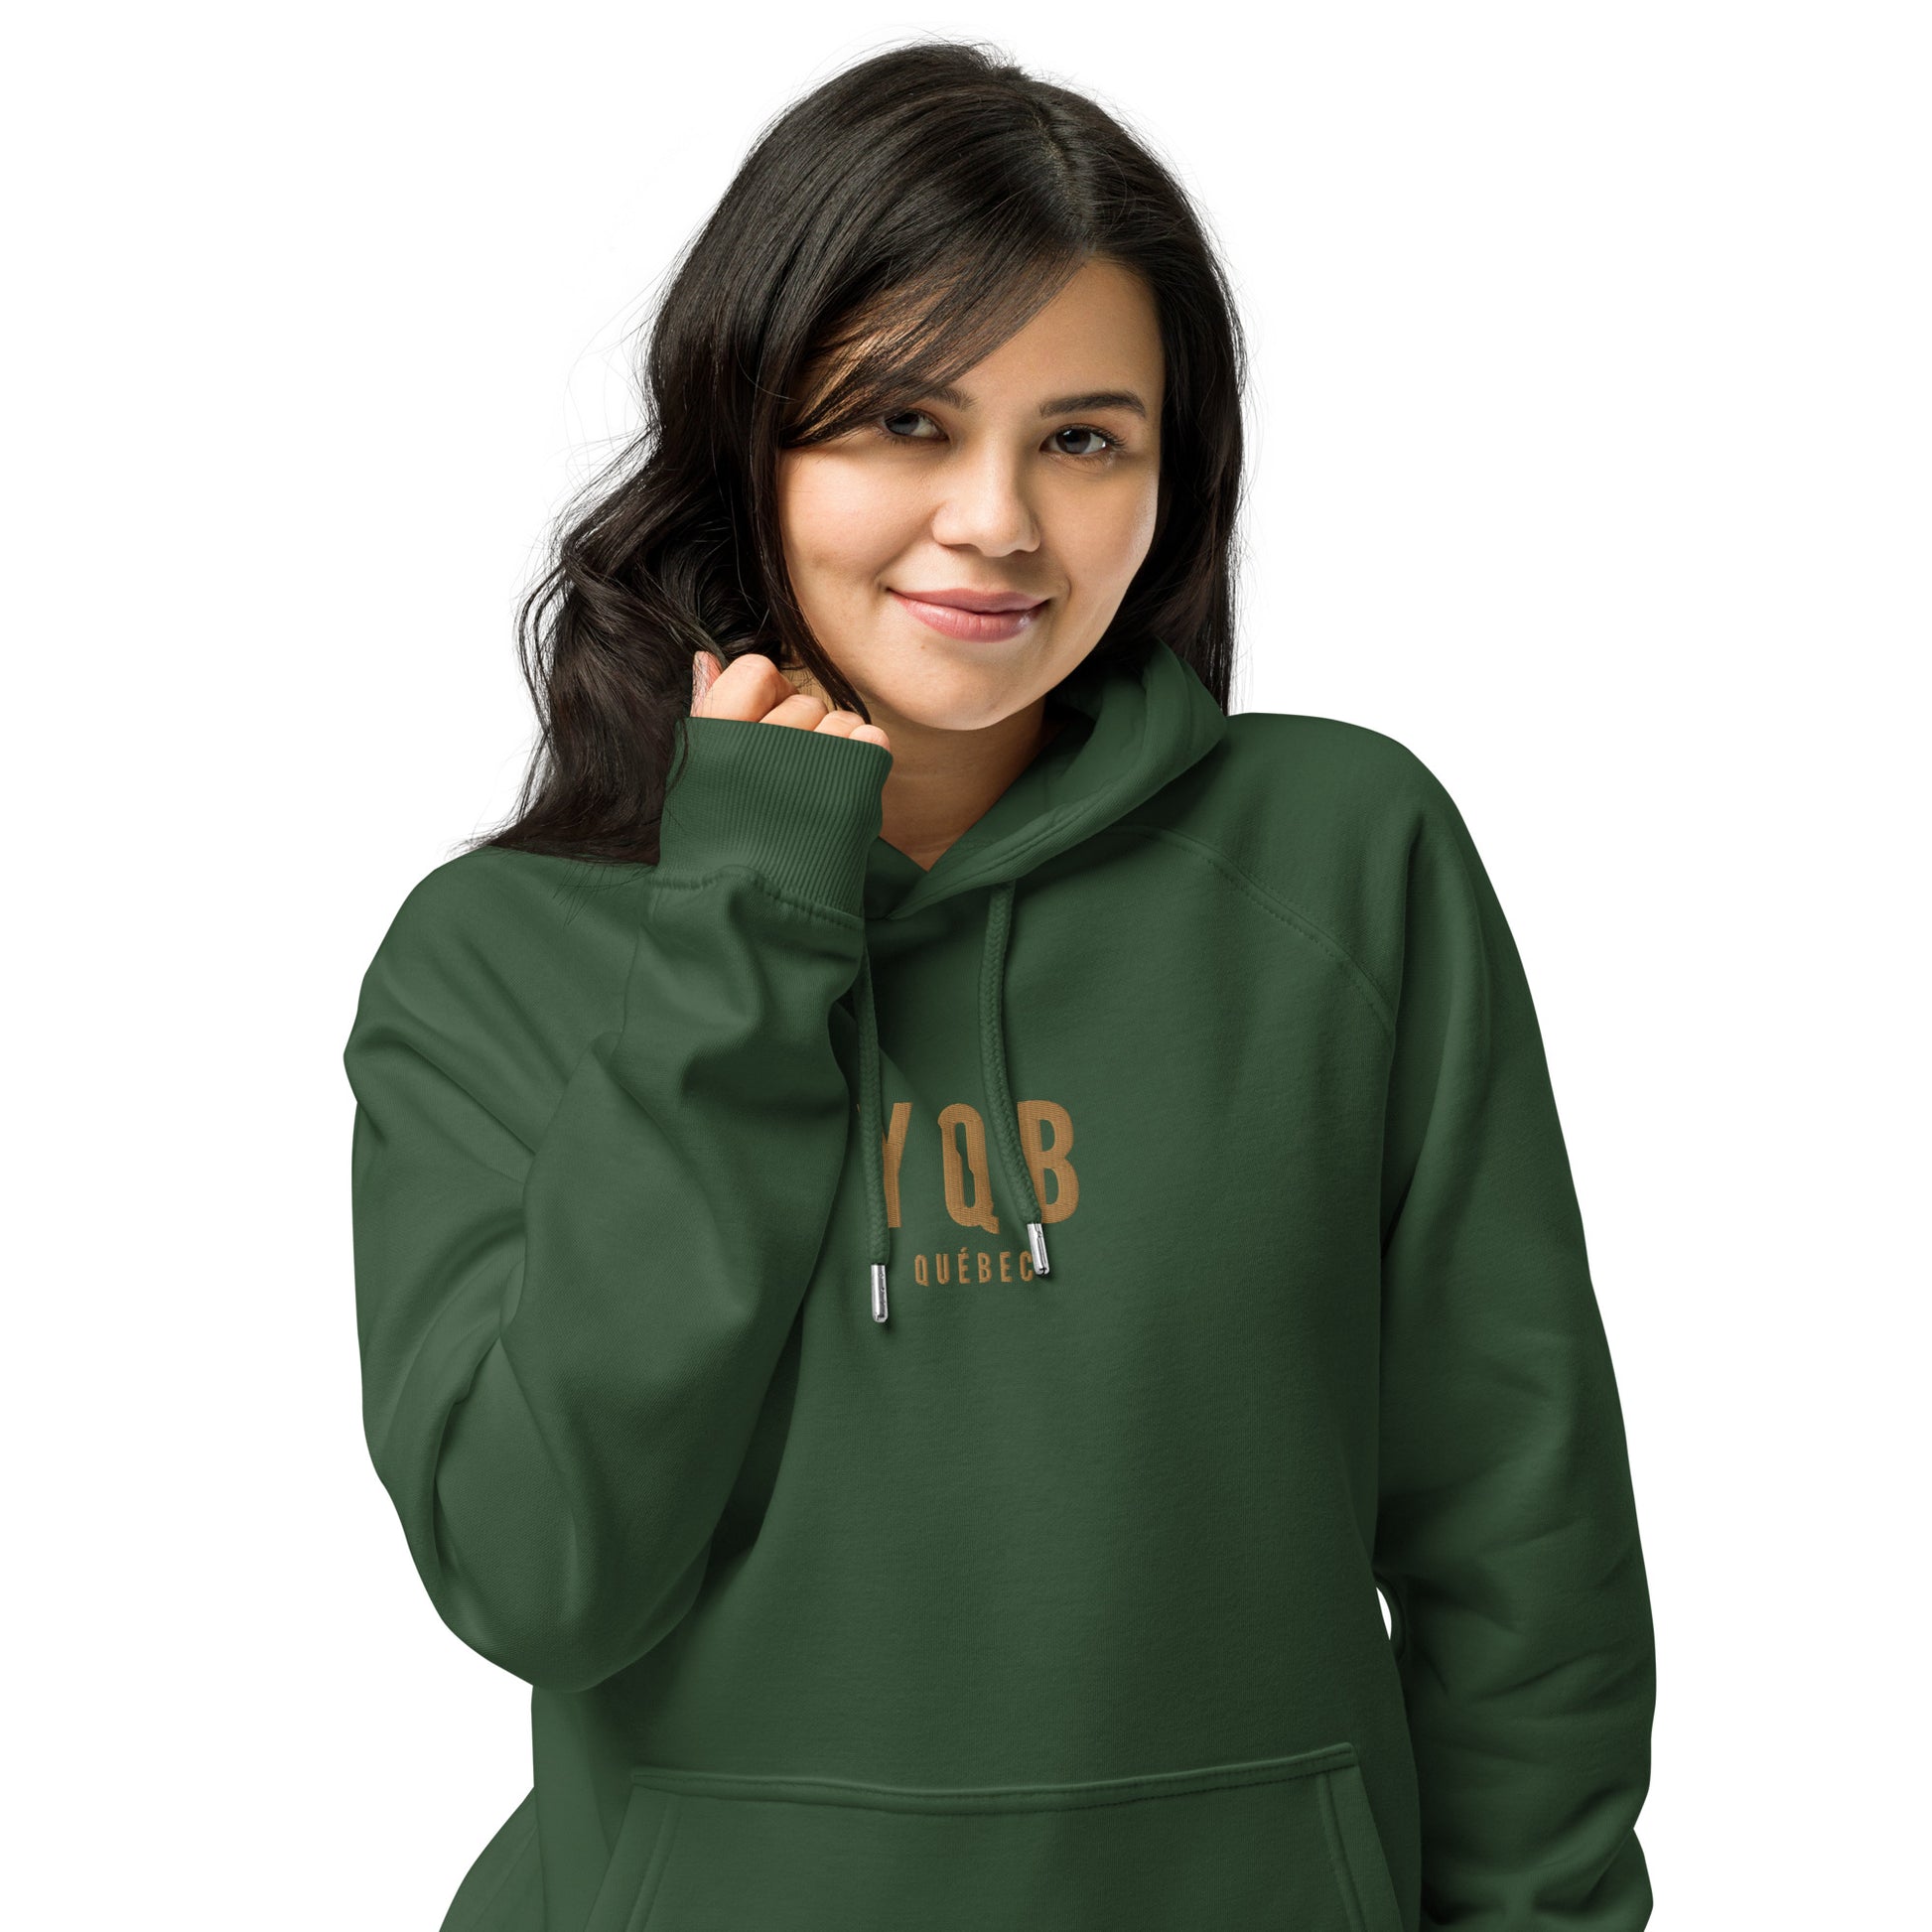 City Organic Hoodie - Old Gold • YQB Quebec City • YHM Designs - Image 03